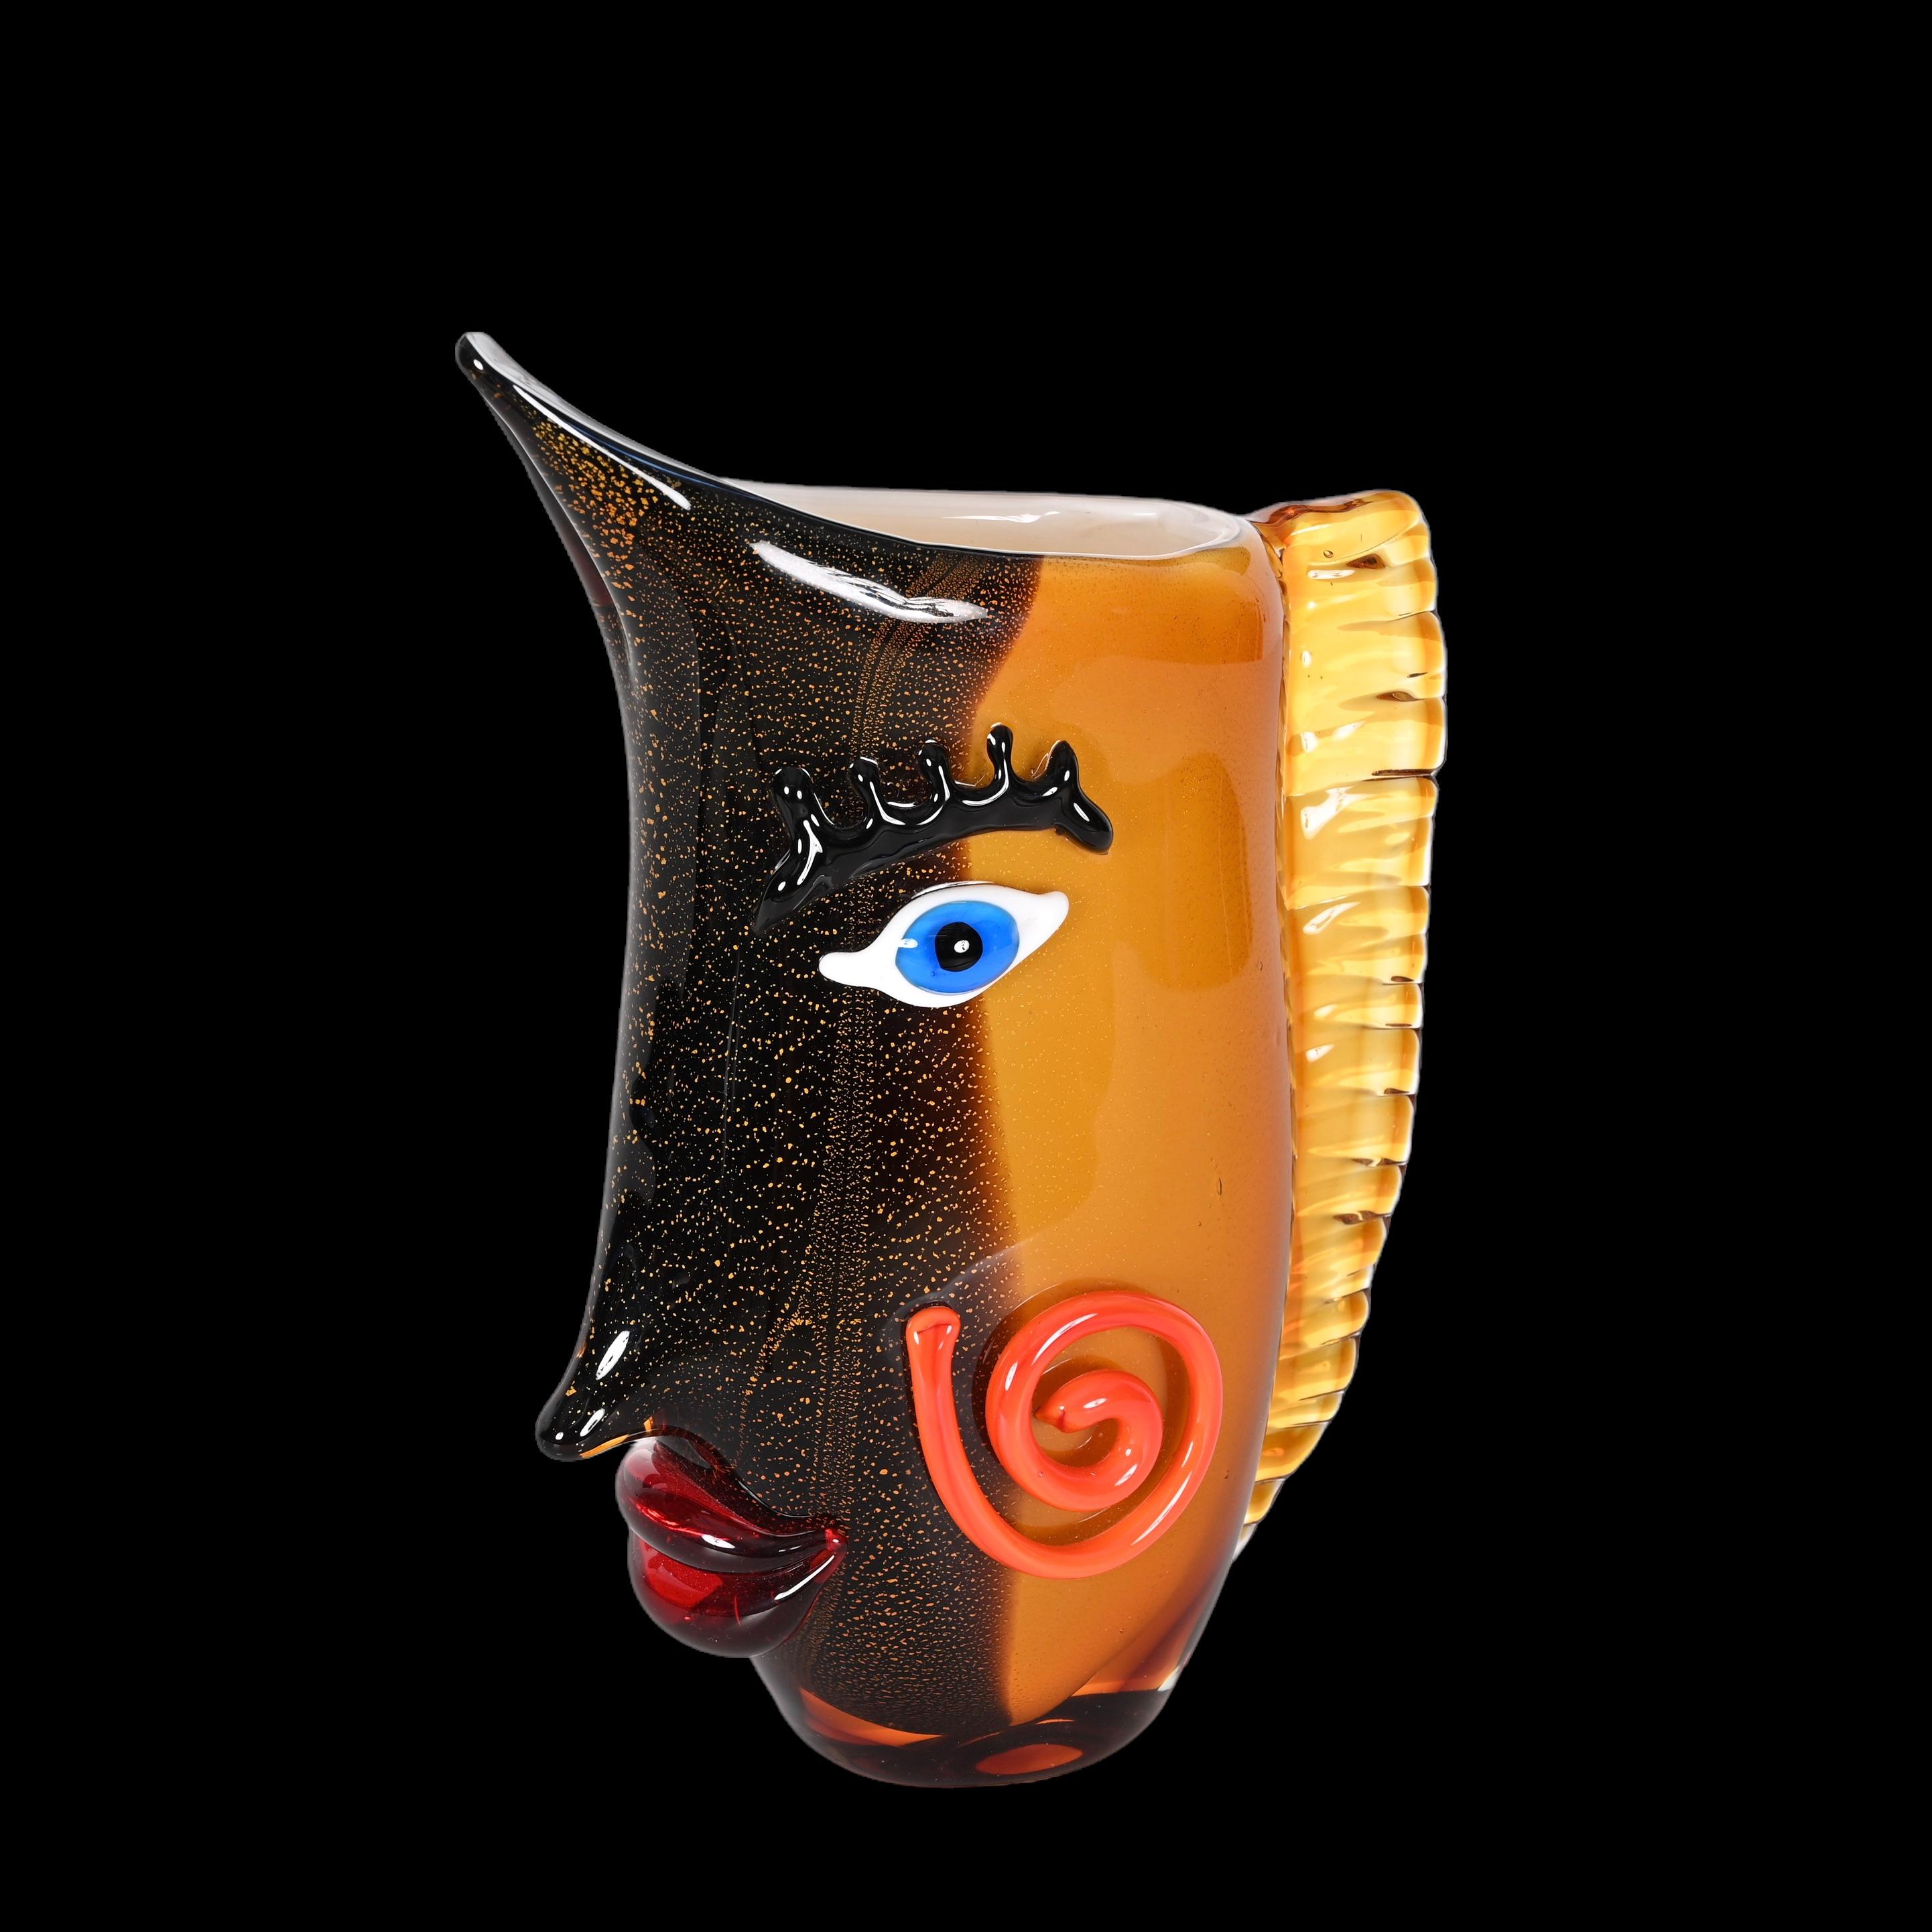 Mario Badioli after Picasso Black and Orange Sommerso Murano Glass Vase, 1980s For Sale 2